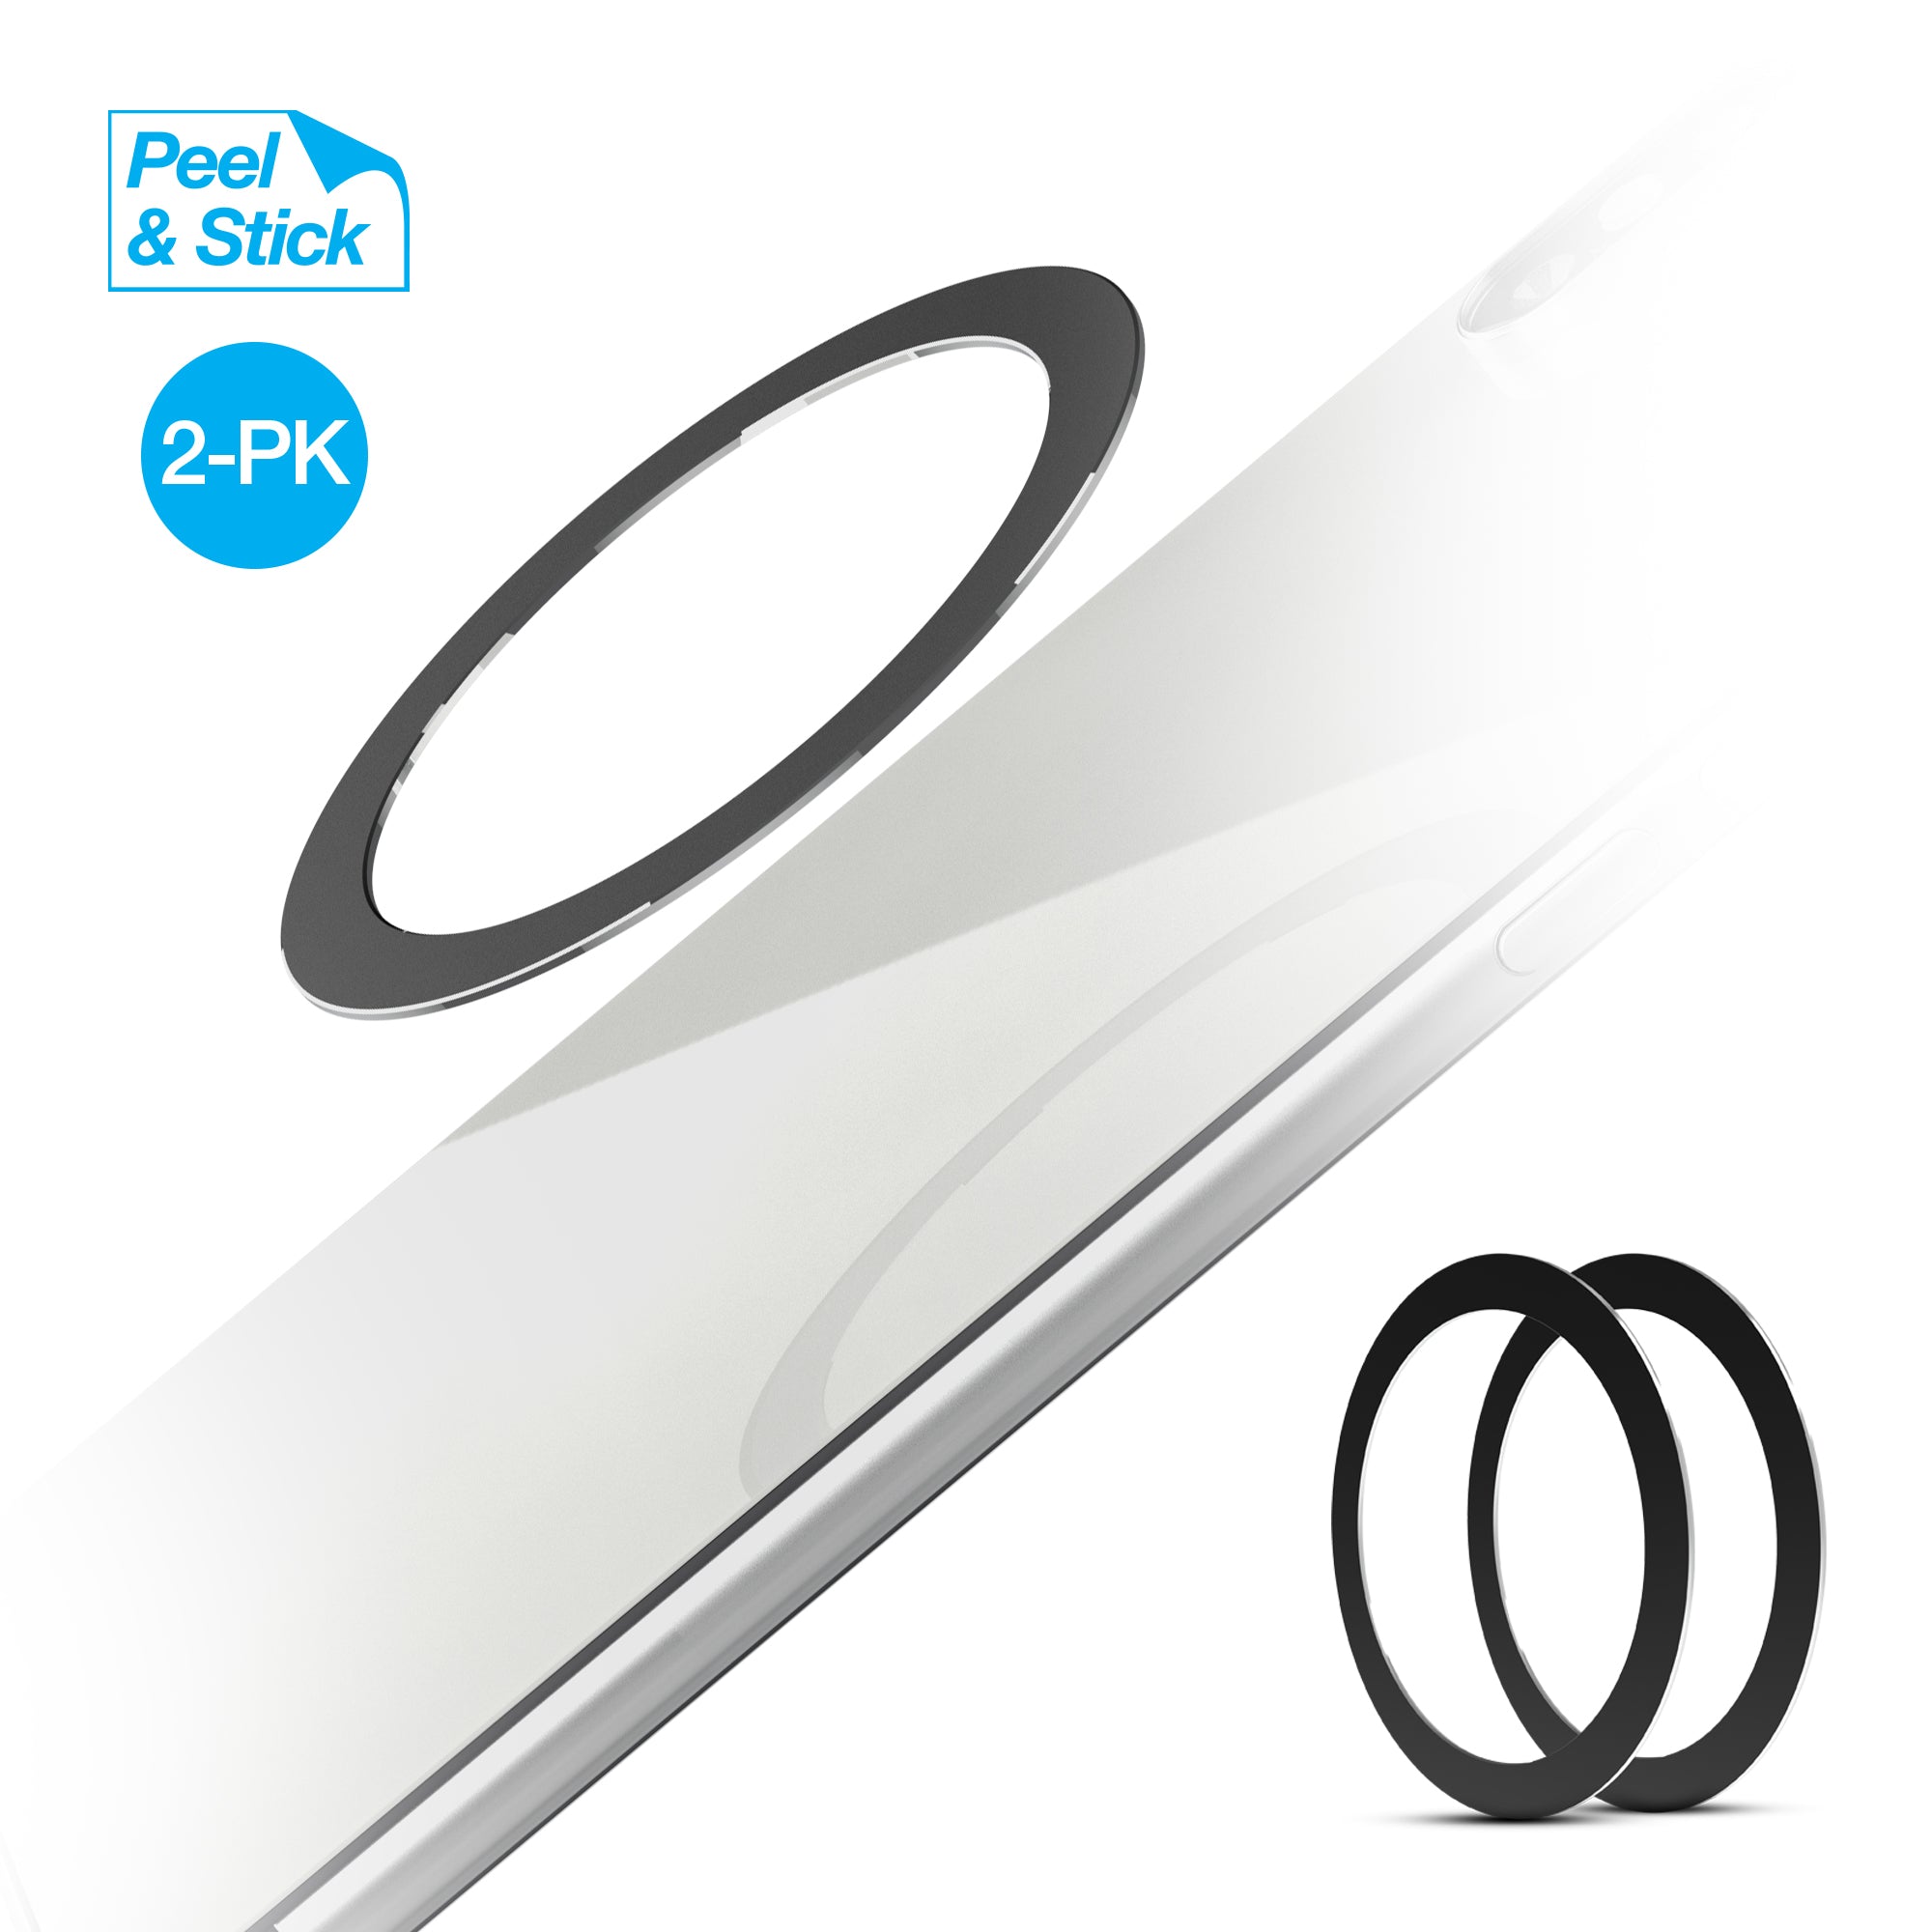 MagSafe Magnetic Ring - iPhone & Android 2-Pack